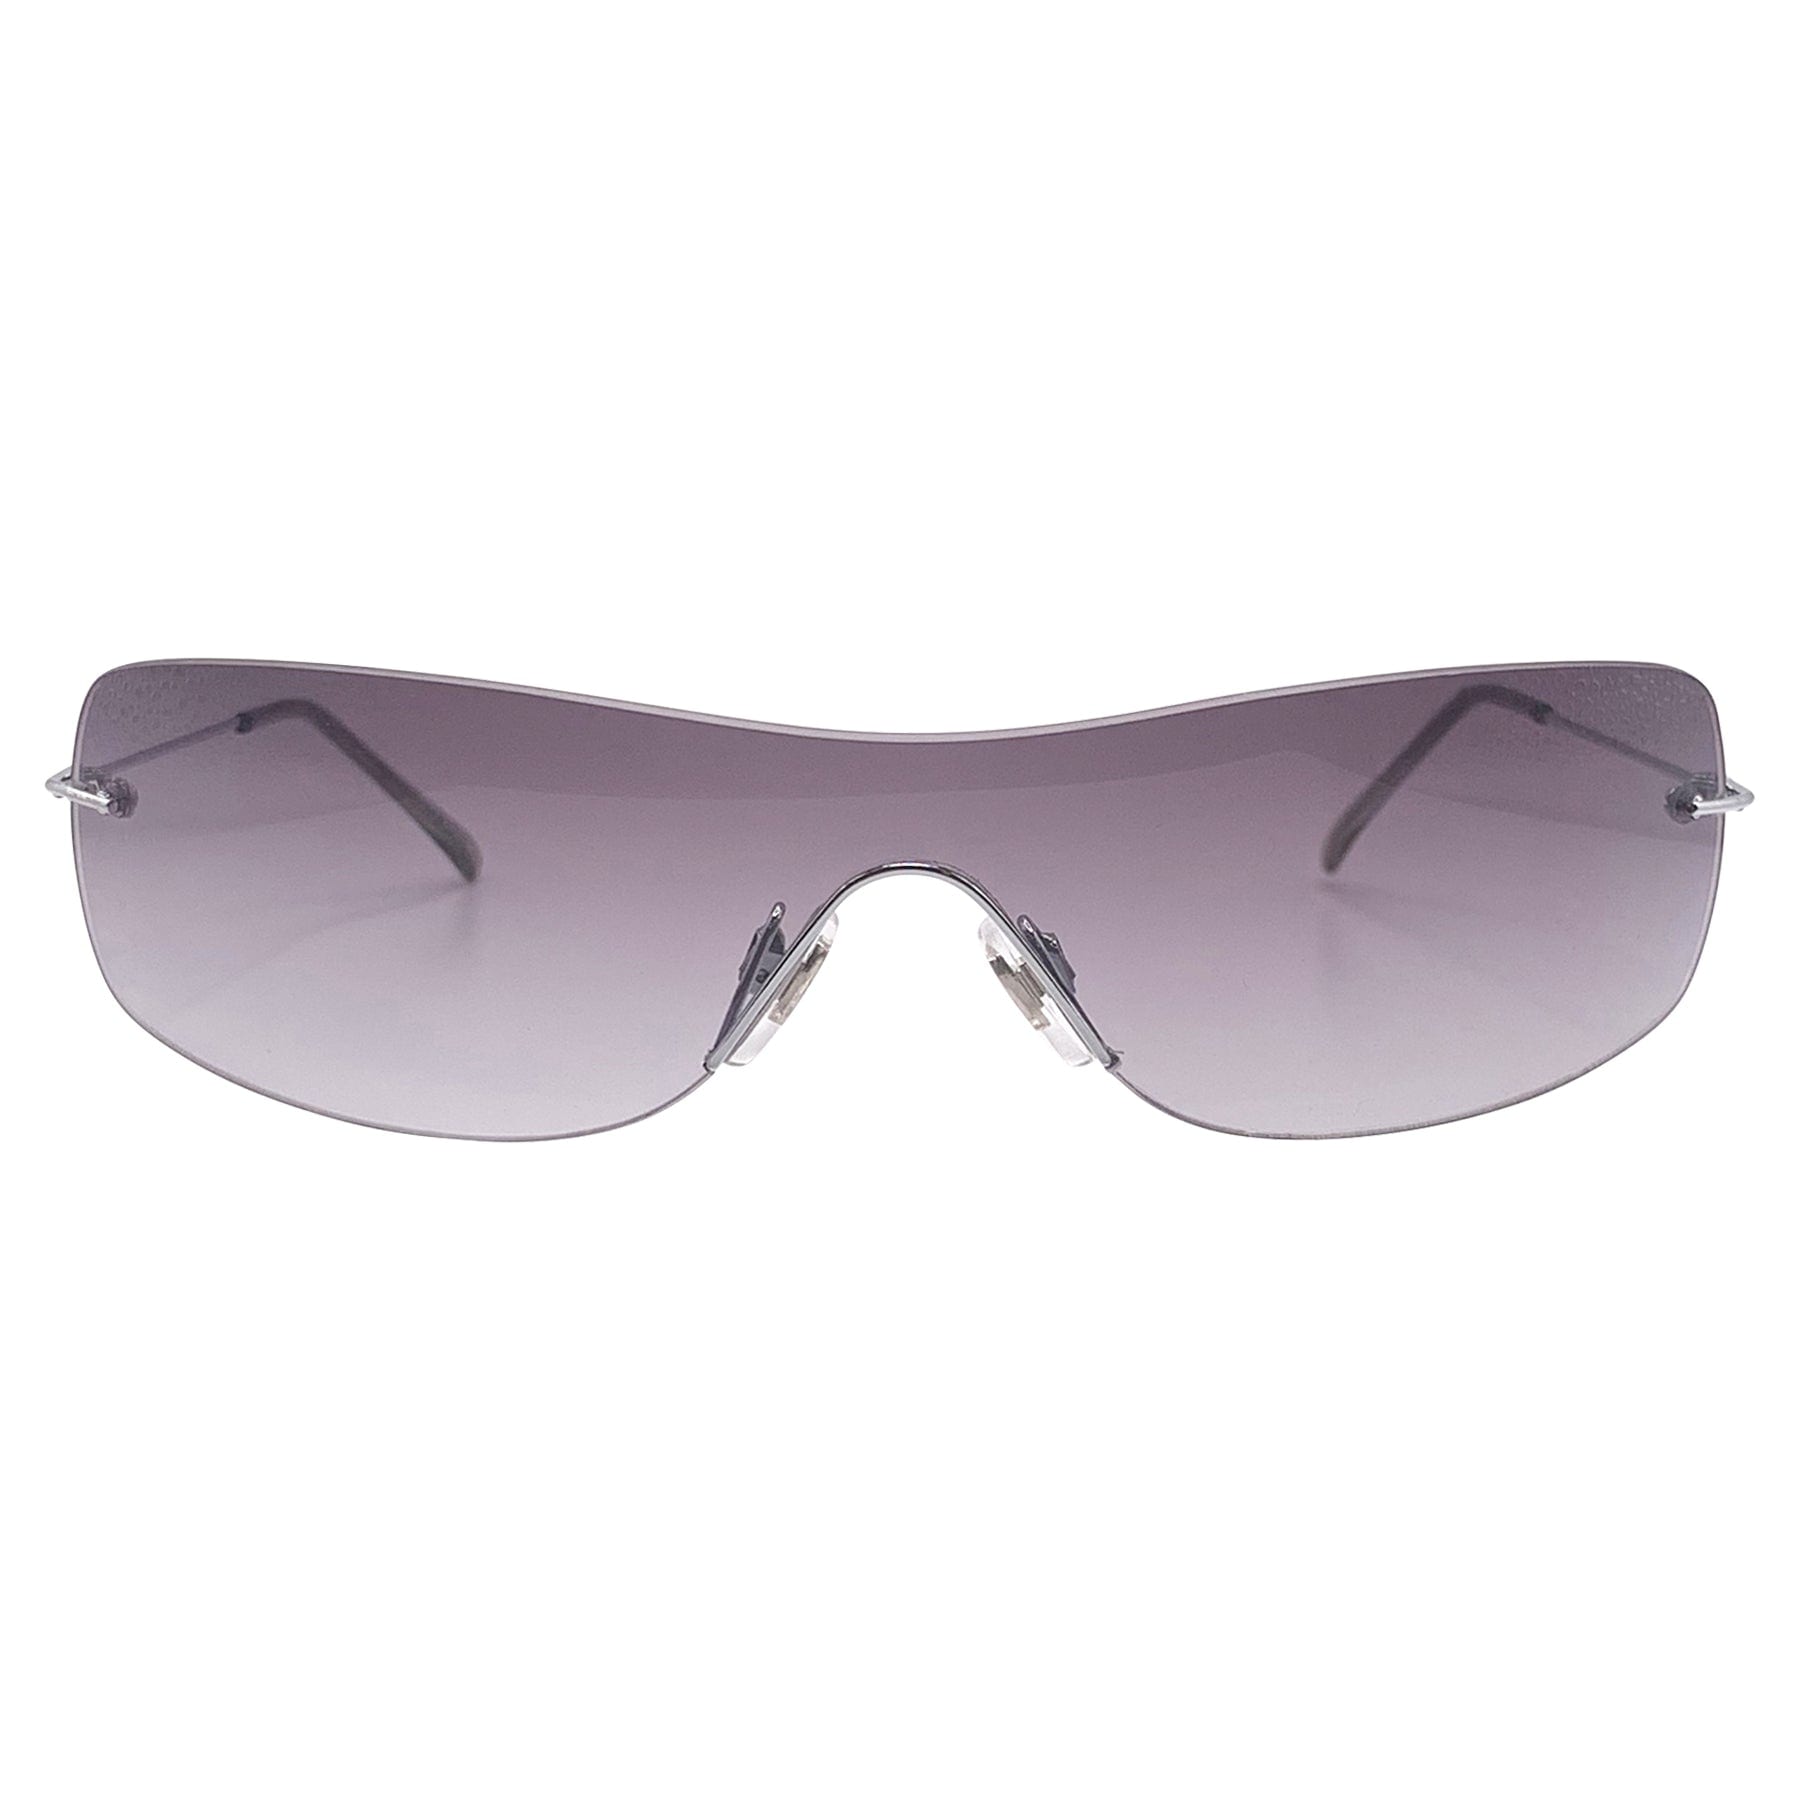 shield sunglasses womens and mens with a y2k style frame 